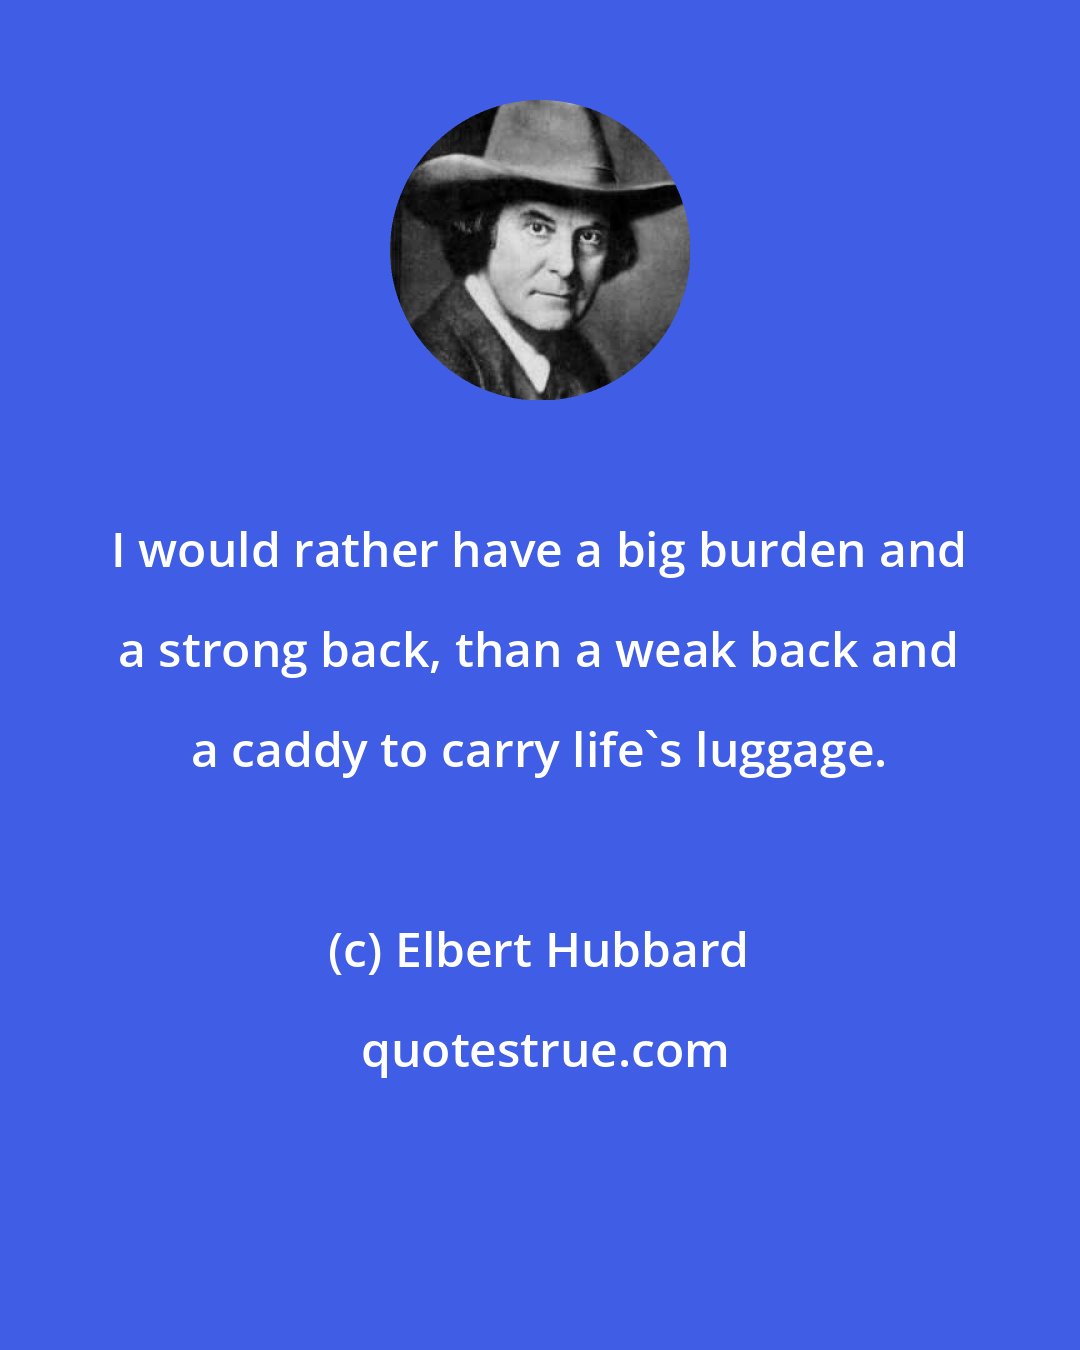 Elbert Hubbard: I would rather have a big burden and a strong back, than a weak back and a caddy to carry life's luggage.